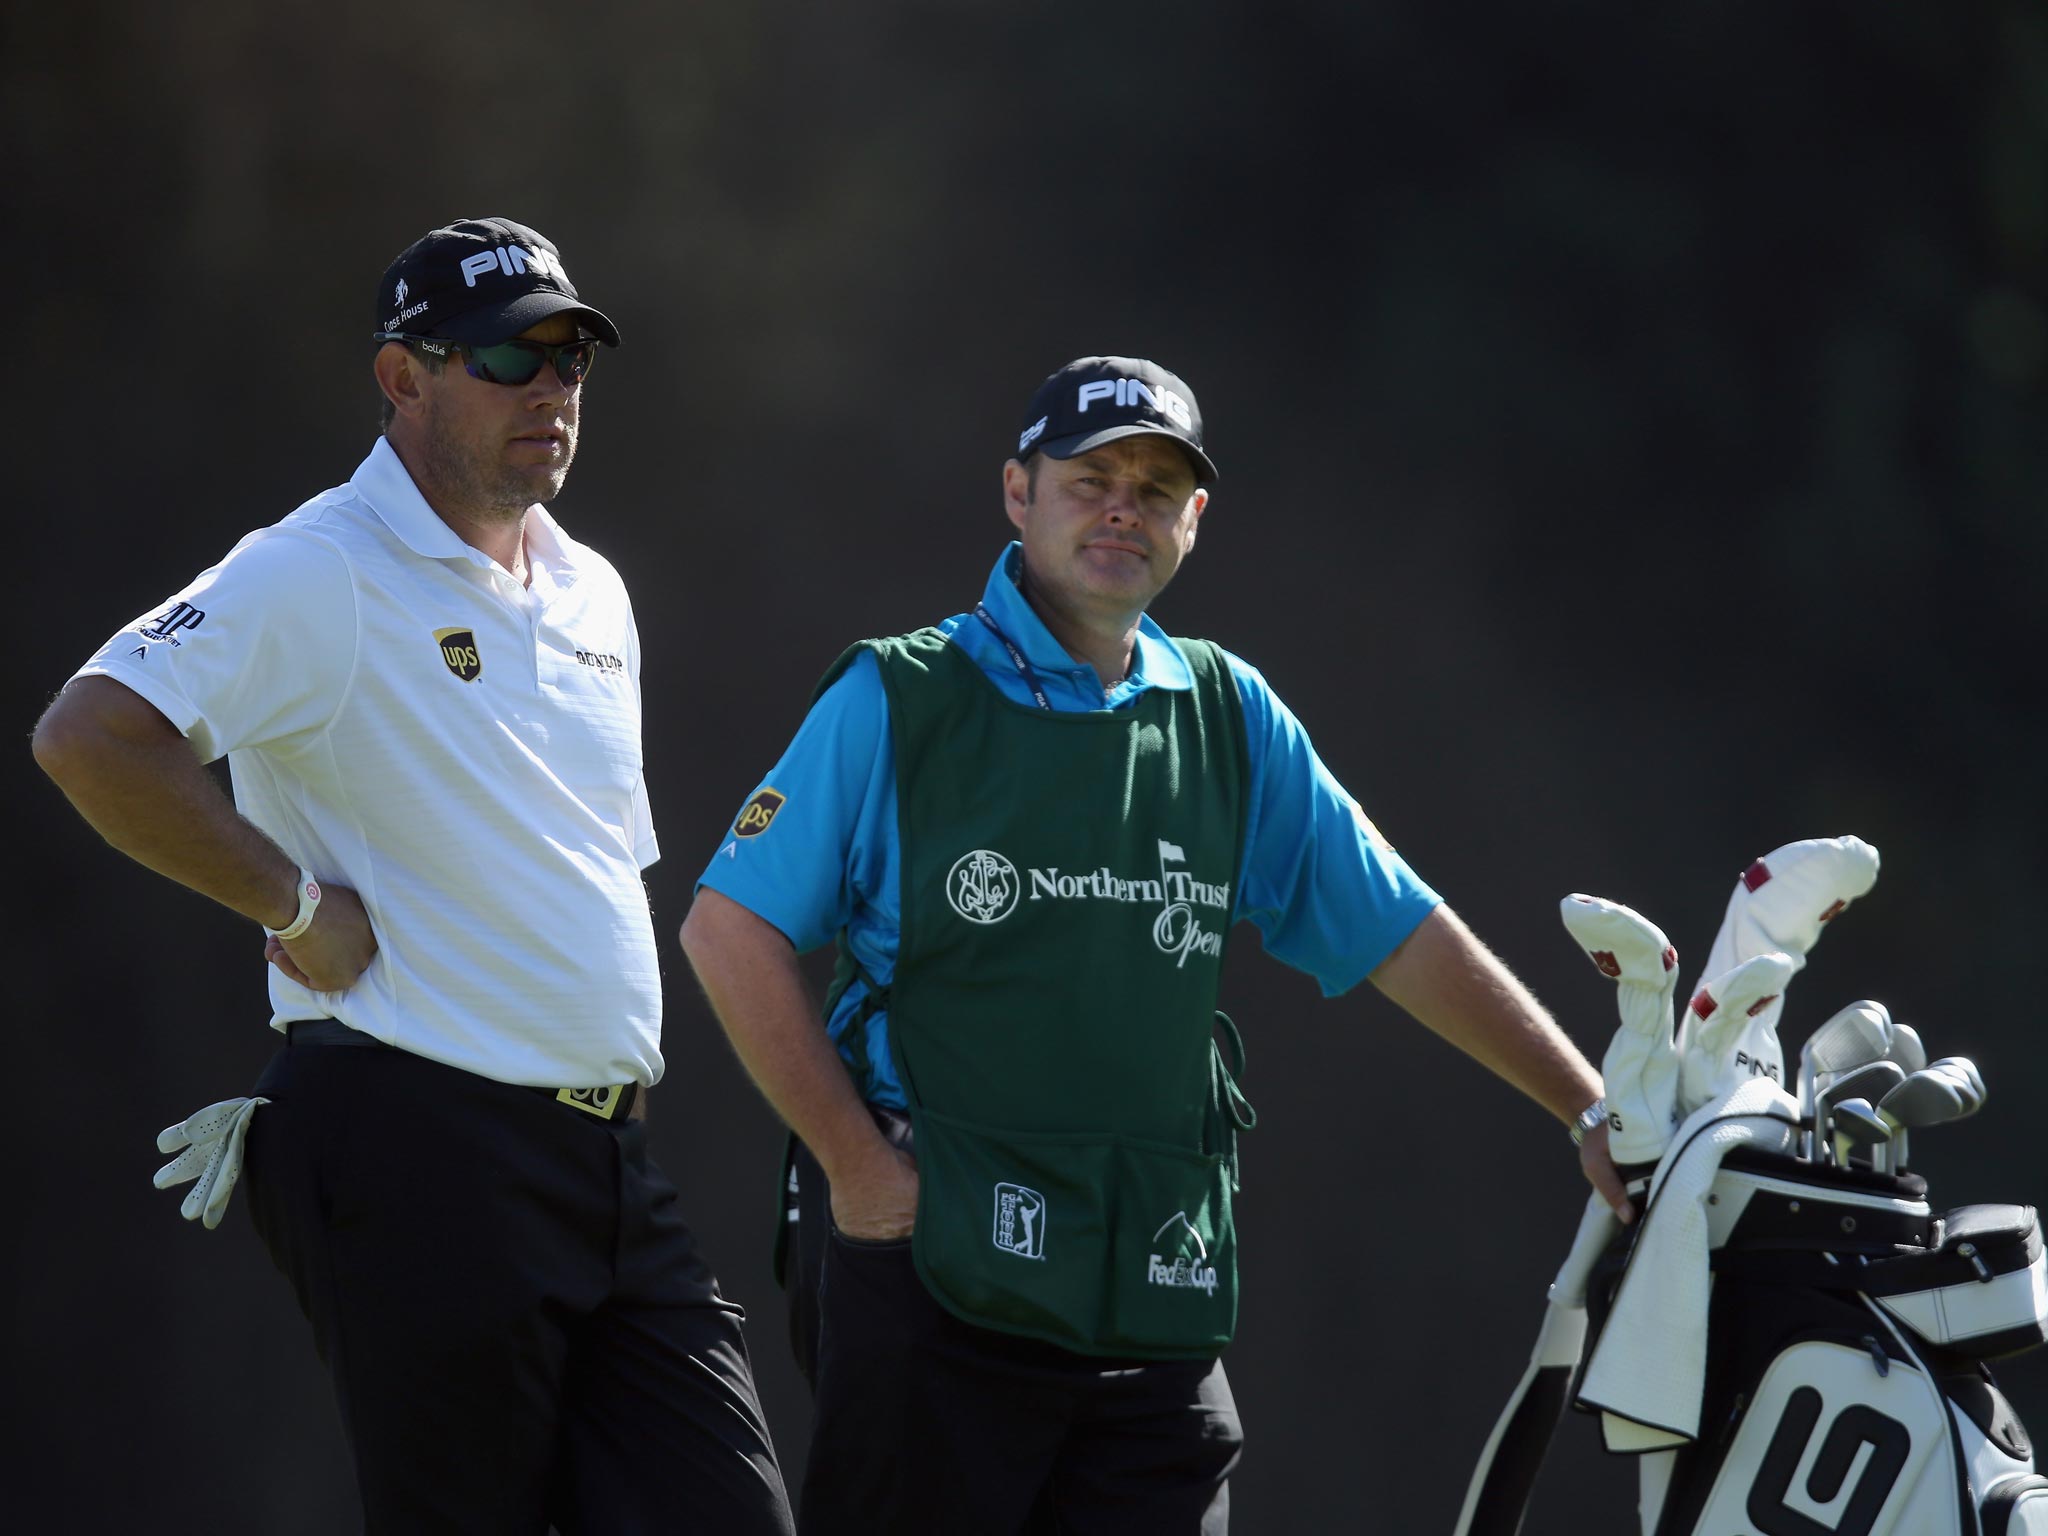 Caddie Billy Foster (right) on course with Lee Westwood